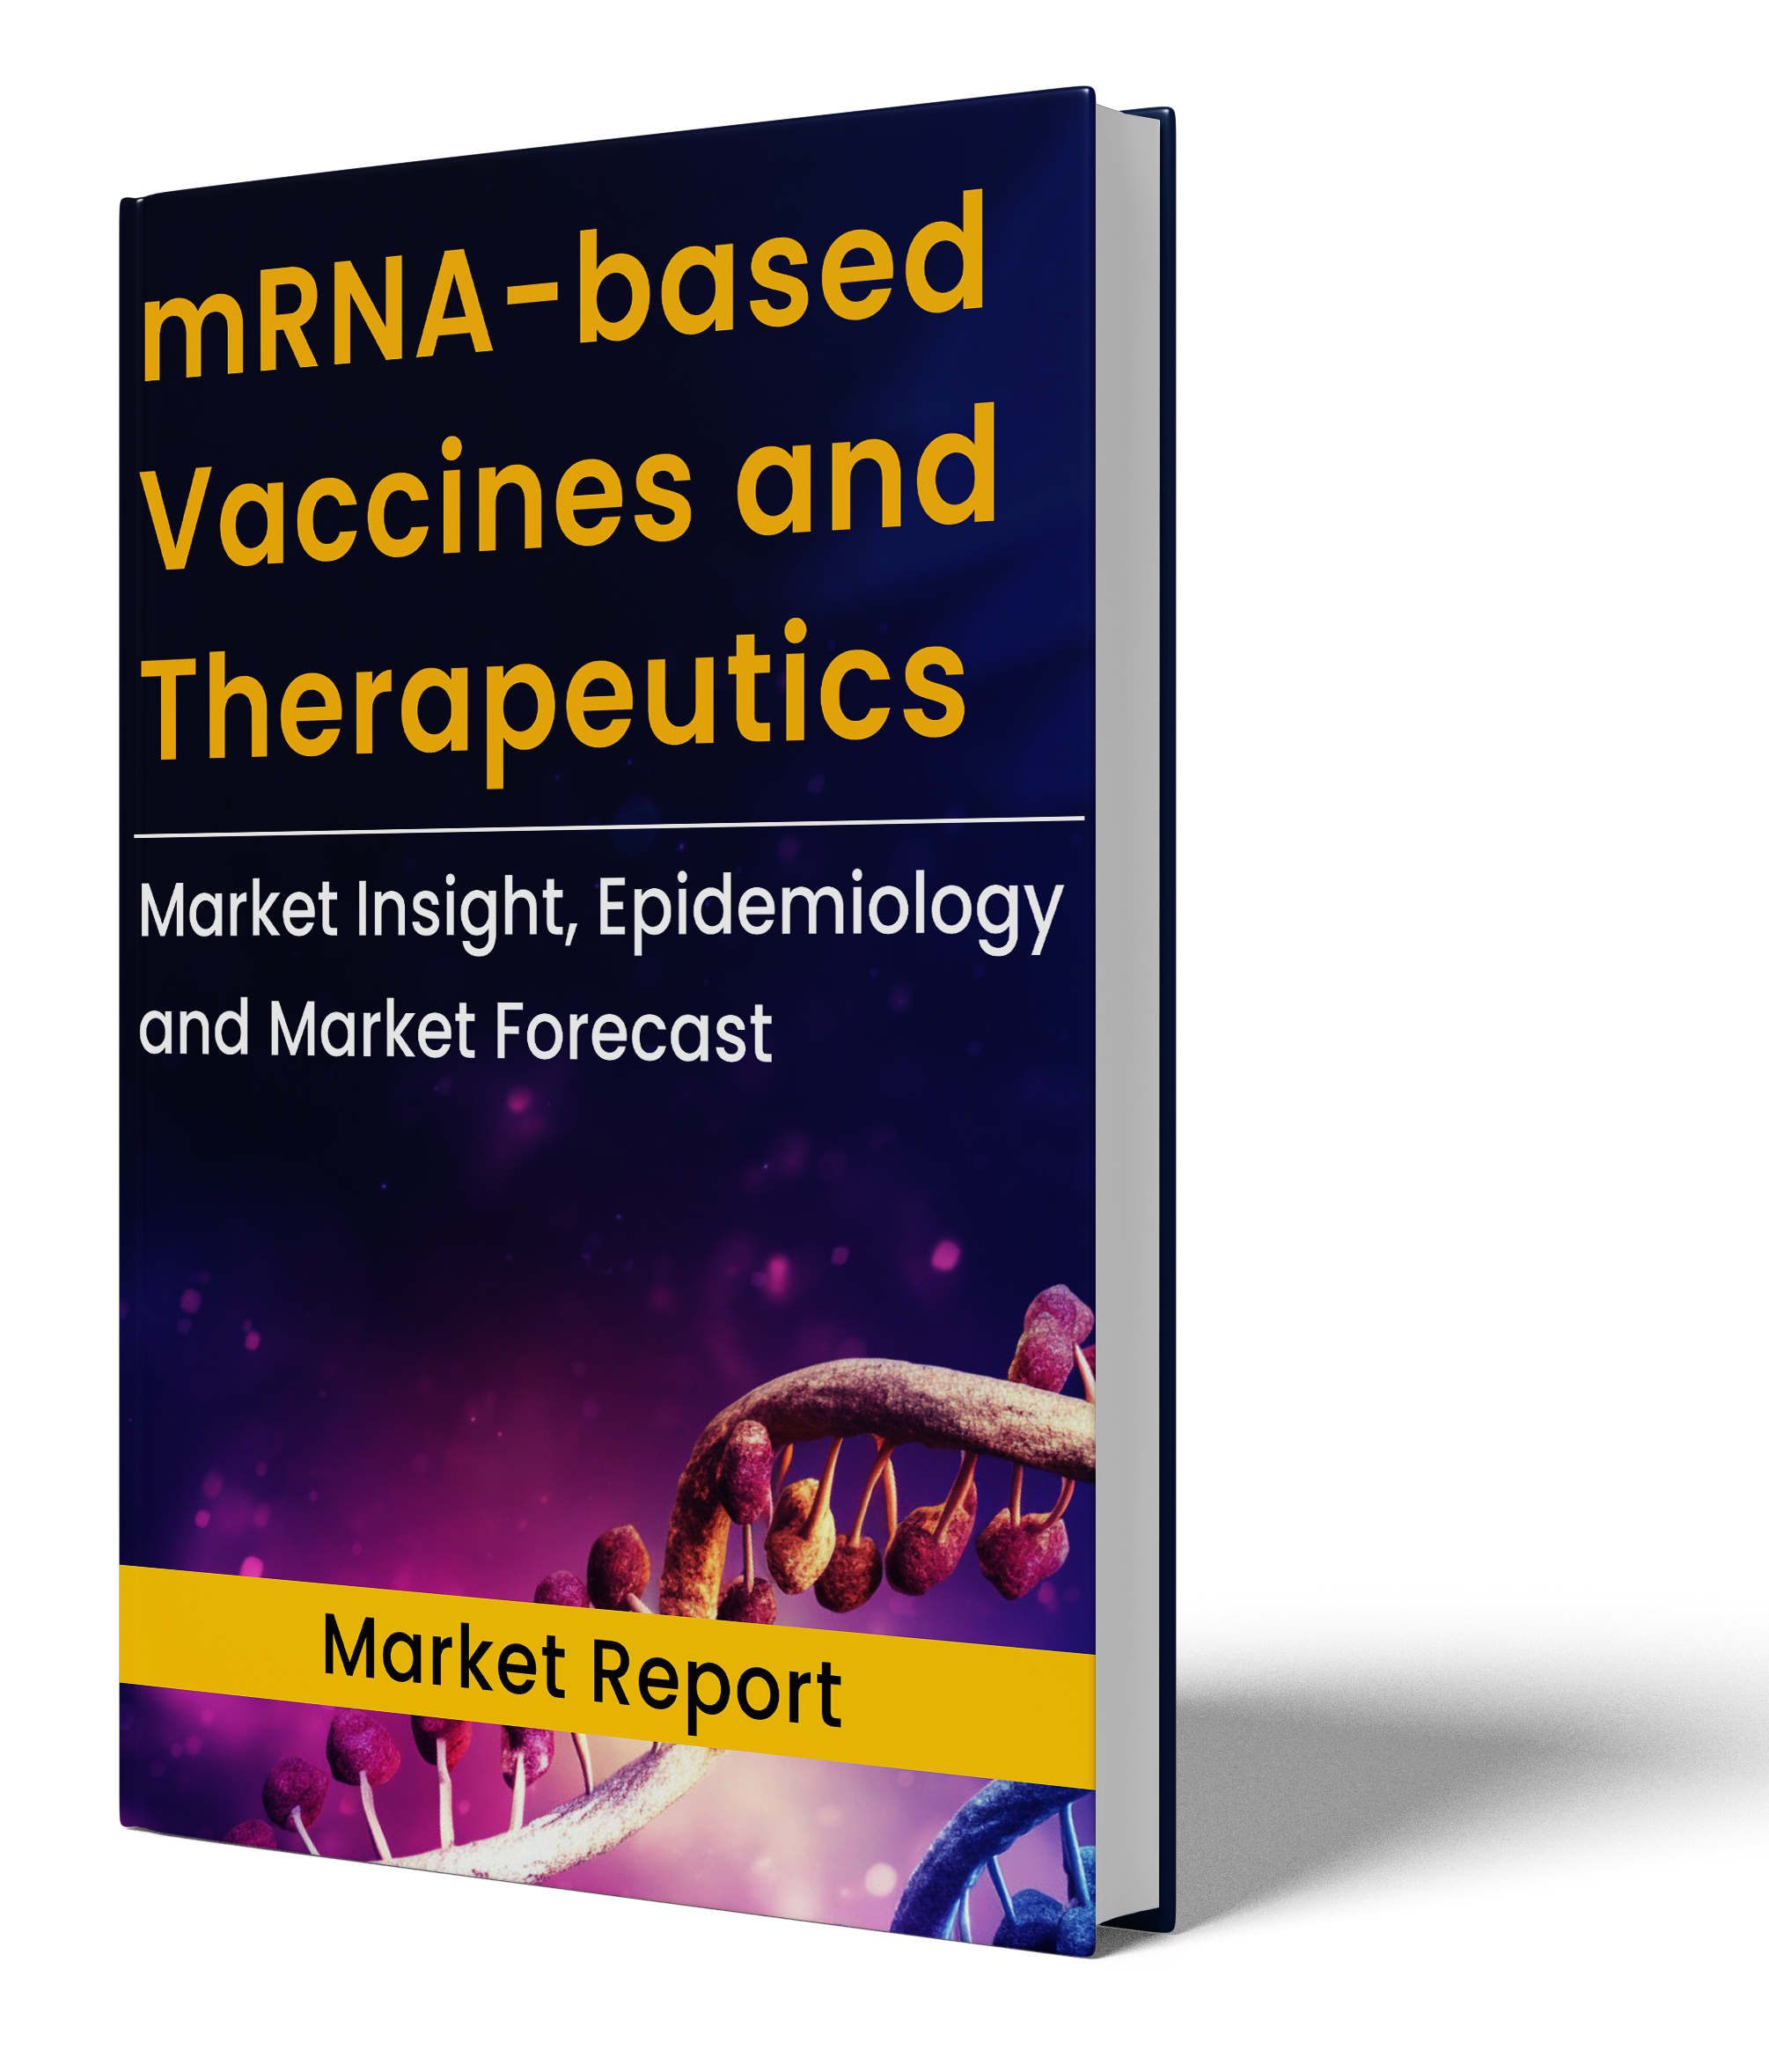 mRNA-based Vaccines and Therapeutics Market Report